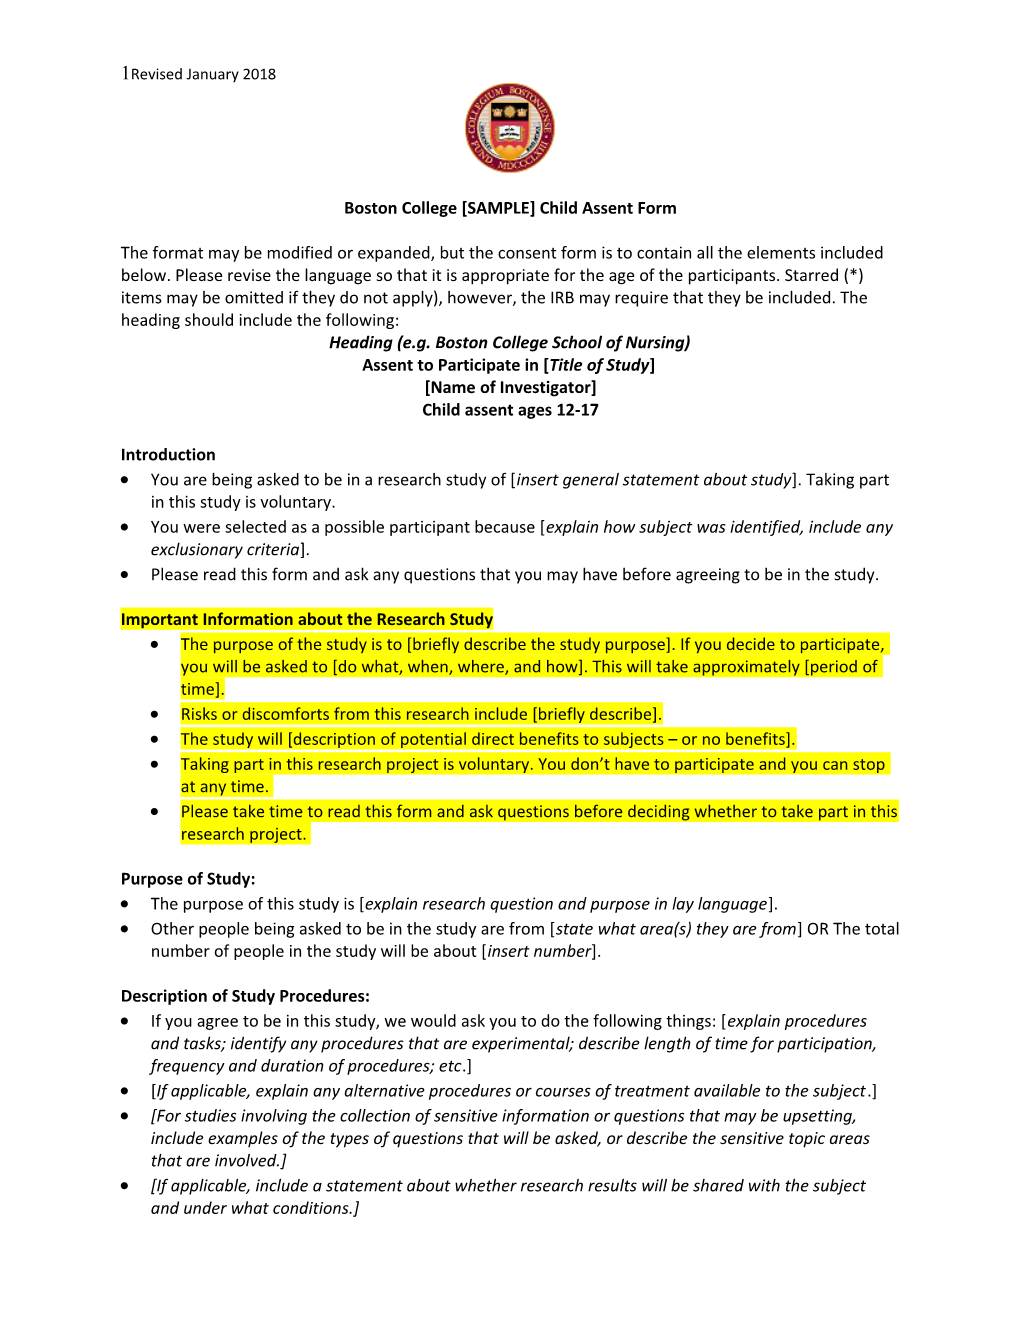 University of Southern Maine SAMPLE CONSENT FORM Format